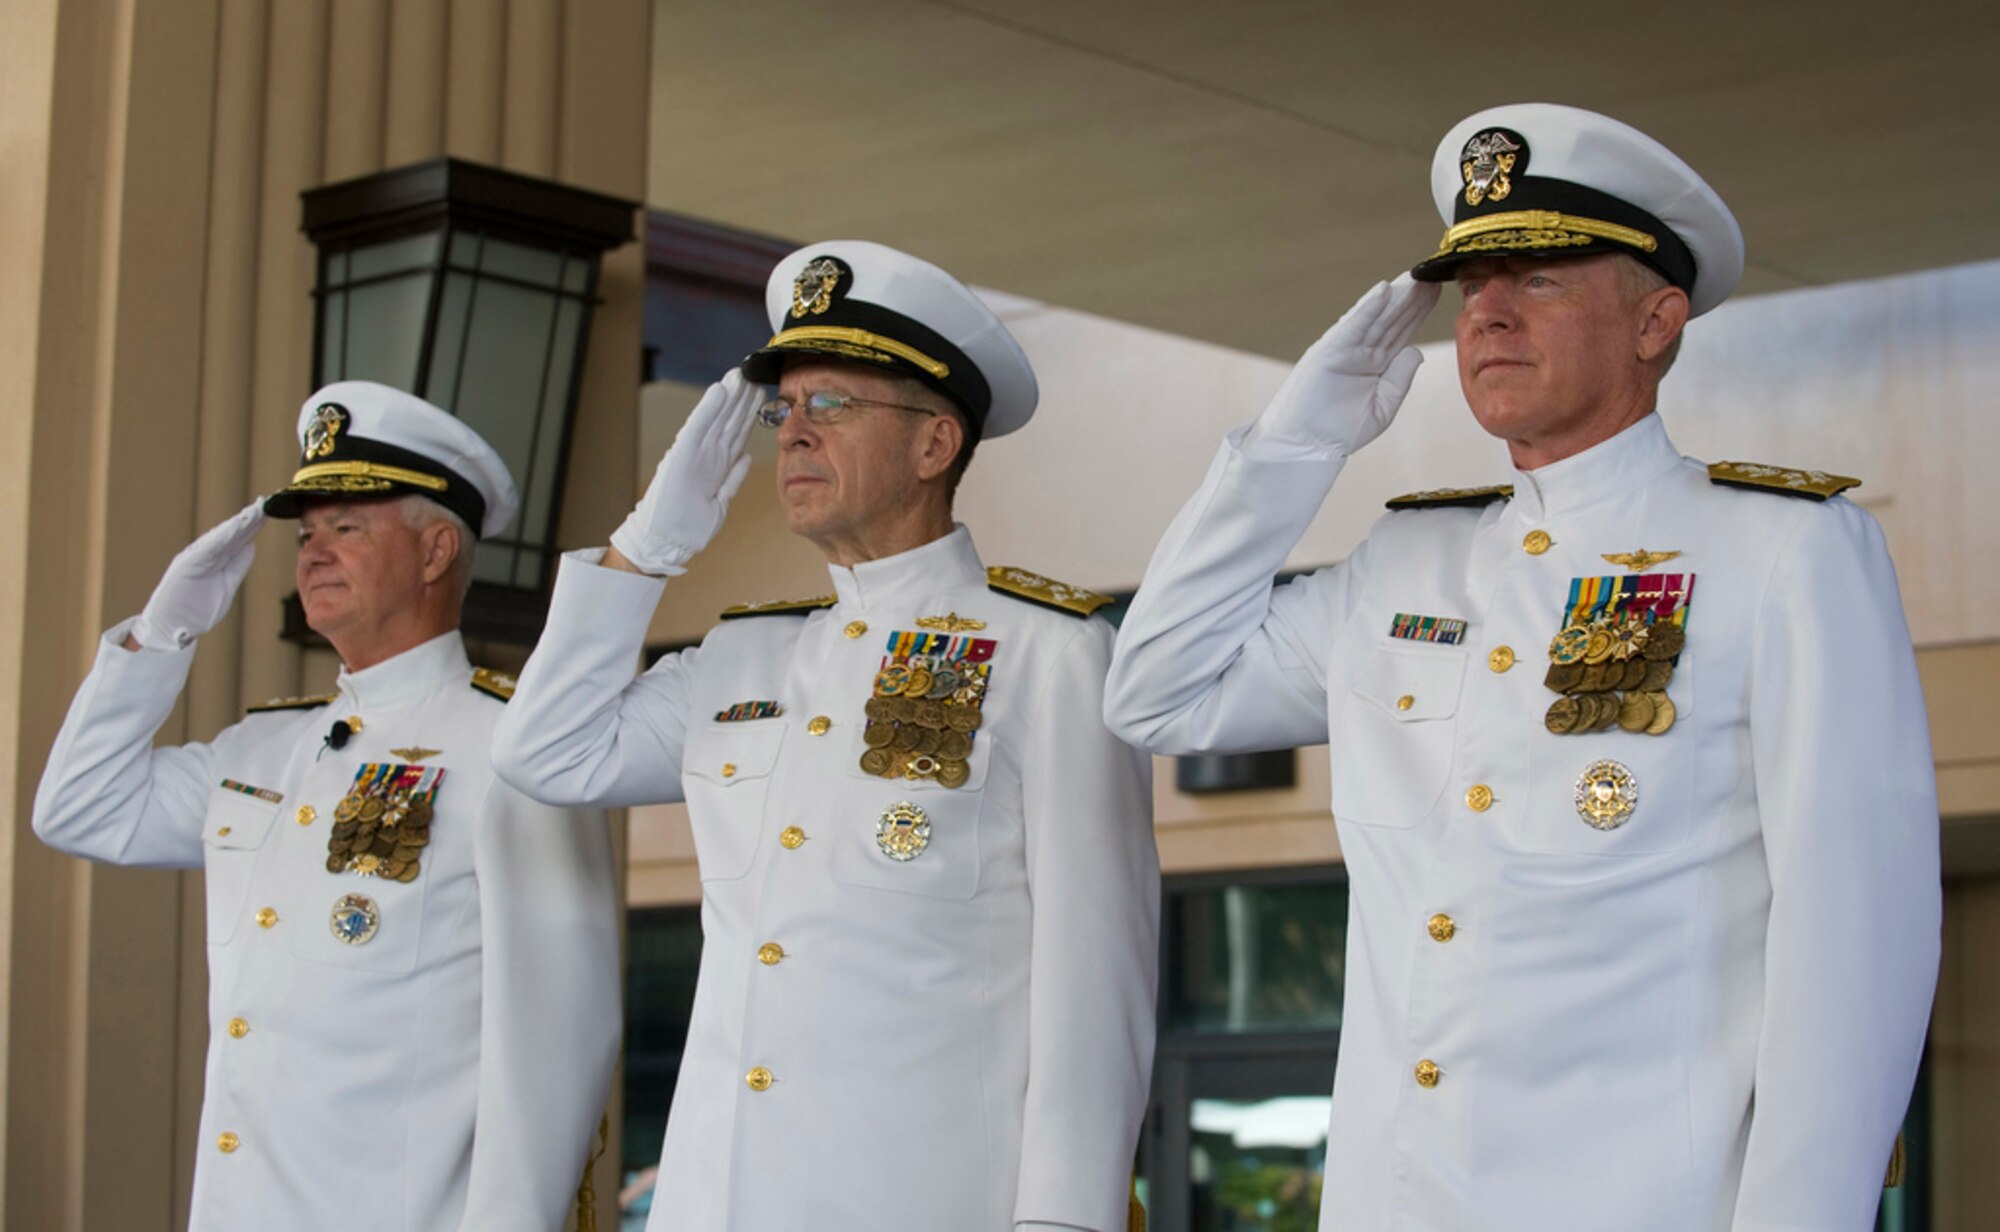 Adm. Robert F. Willard (from right), incoming commander of U.S. Pacific Command; Adm. Mike Mullen, chairman of the Joint Chiefs of Staff; and Adm. Timothy J. Keating, outgoing commander of U.S. PaCom, render honors during the singing of the national anthem at the U.S. PaCom change of command ceremony Oct. 19, 2009, at Camp H.M. Smith, Hawaii. Admiral Willard, former U.S. Pacific Fleet commander, assumed command of U.S. PaCom from Admiral Keating during the ceremony.  (U.S. Navy photo/Navy Petty Officer 2nd Class Elisia V Gonzales)